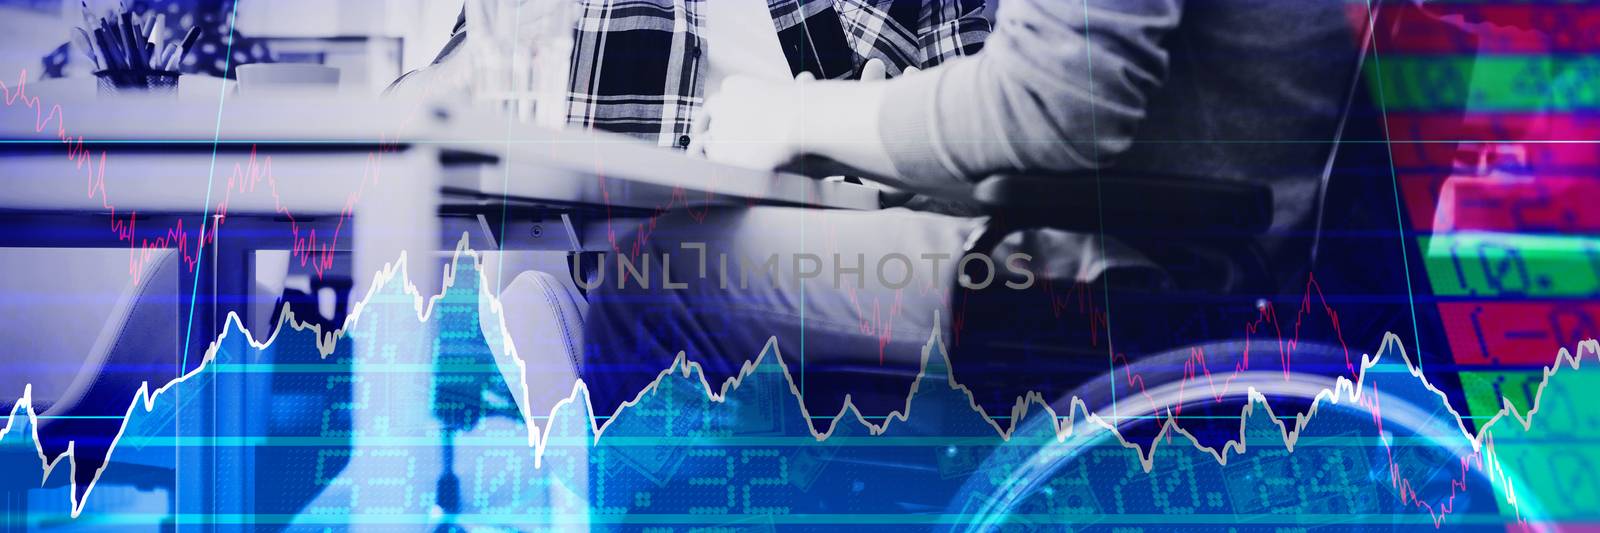 Stocks and shares against handicap businessman sitting with colleague in office